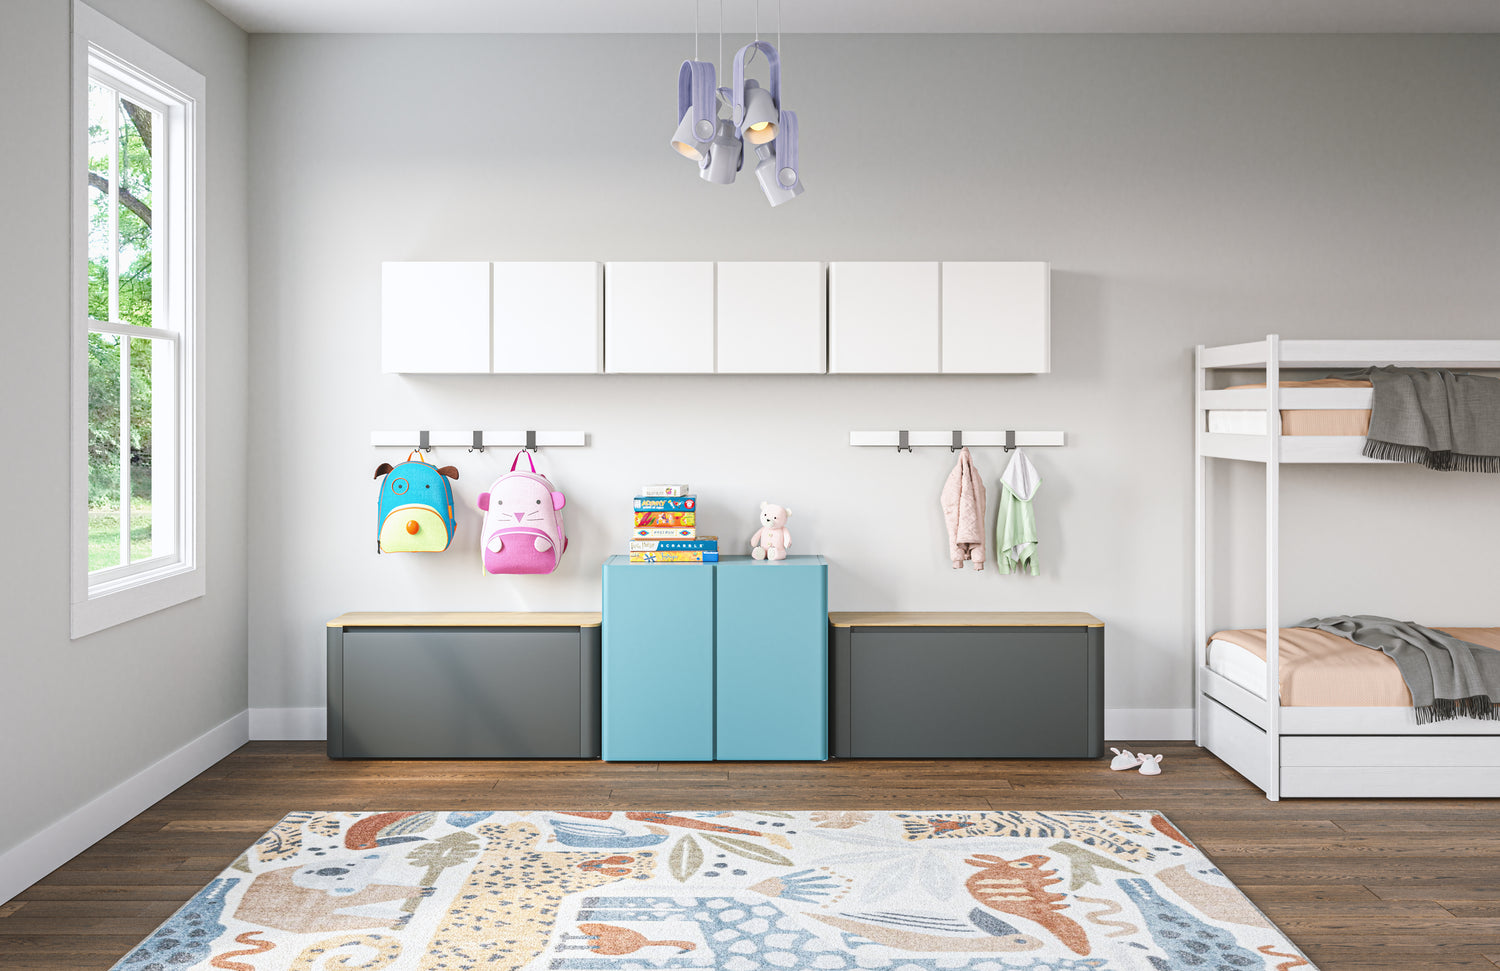 Your home has evolved and so should your storage.